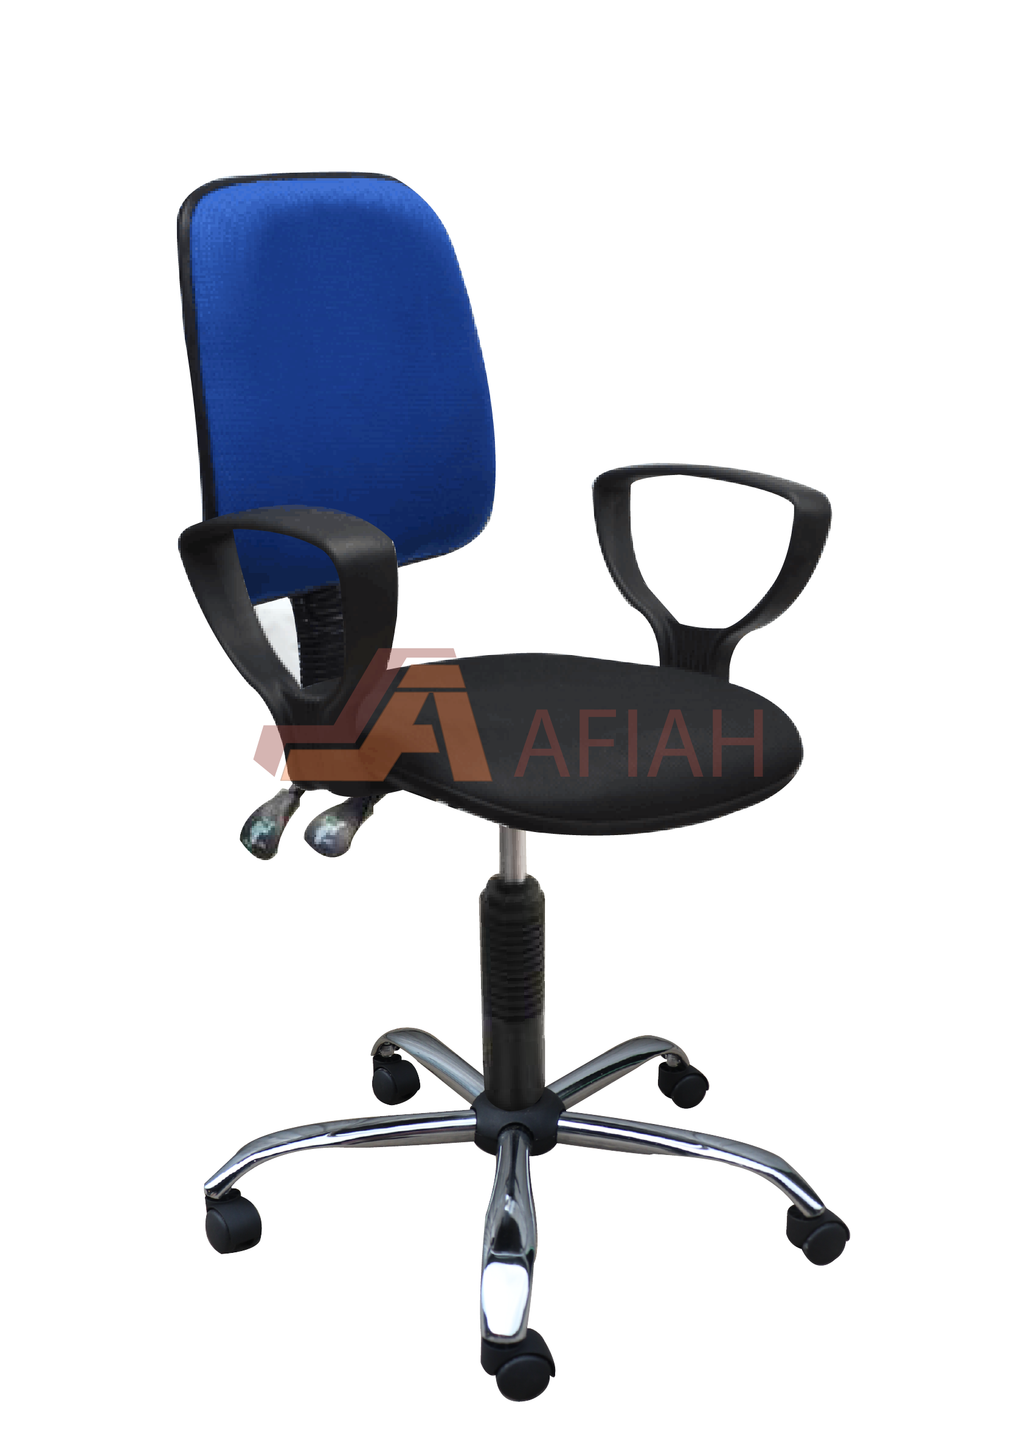 Clerical Chair - Afia Manufacturing Sdn Bhd, Afiah Trading Company